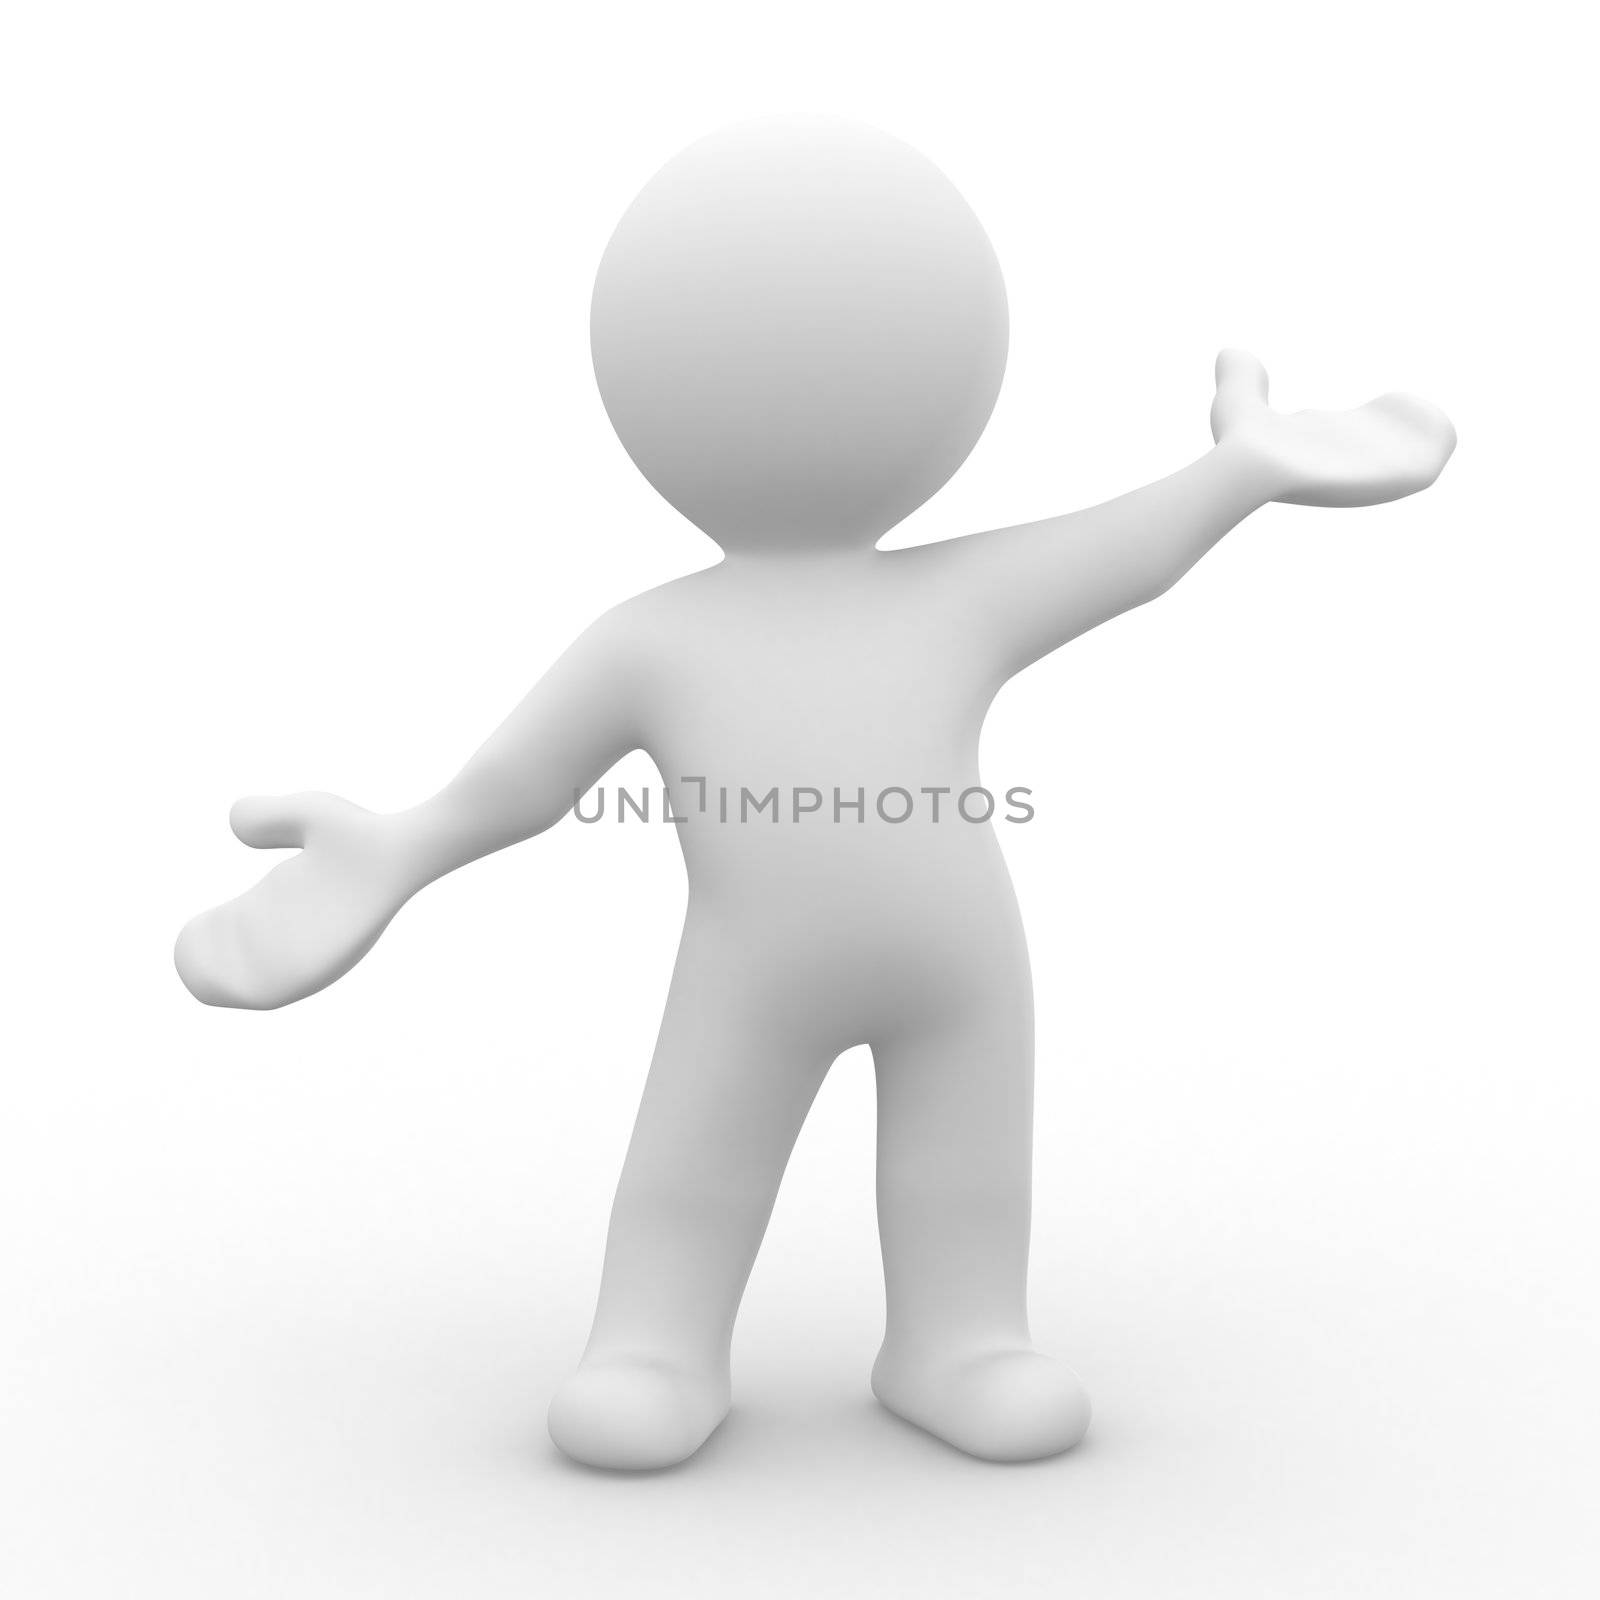 3d abstract person in a welcome pose